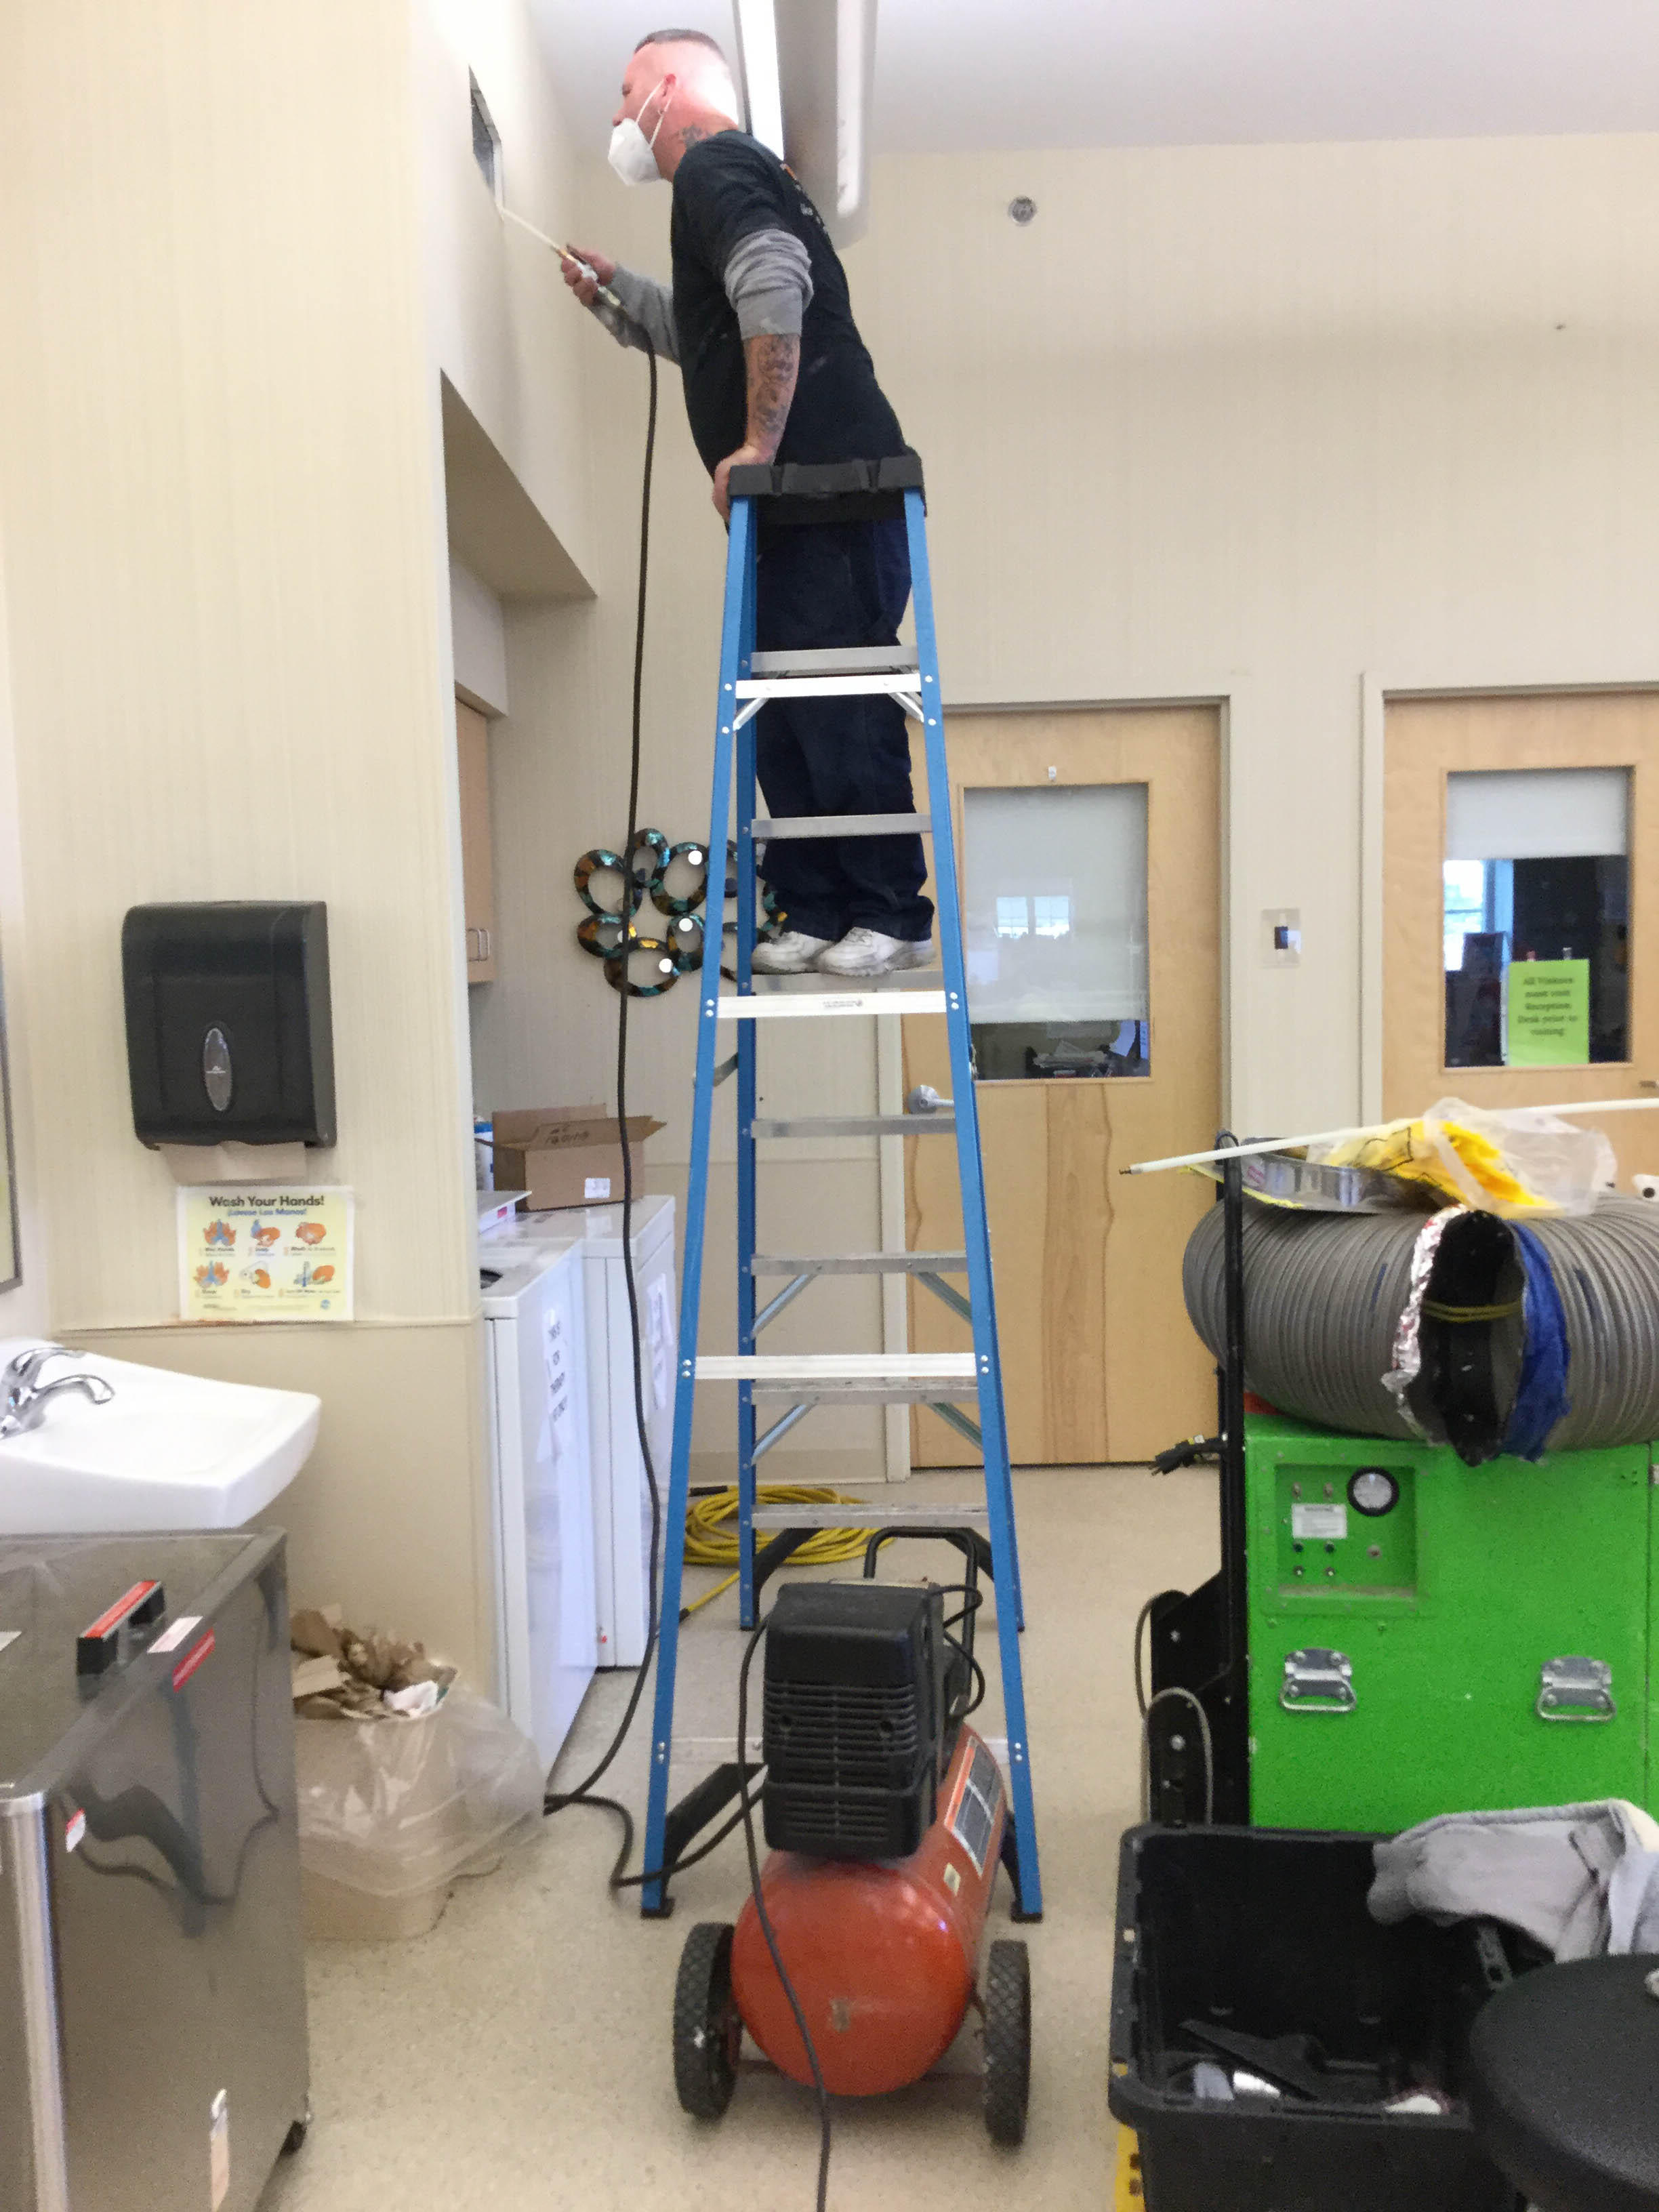 When your building needs your air ducts clean, SERVPRO of Langhorne / Bensalem has all the equipment and training to help!